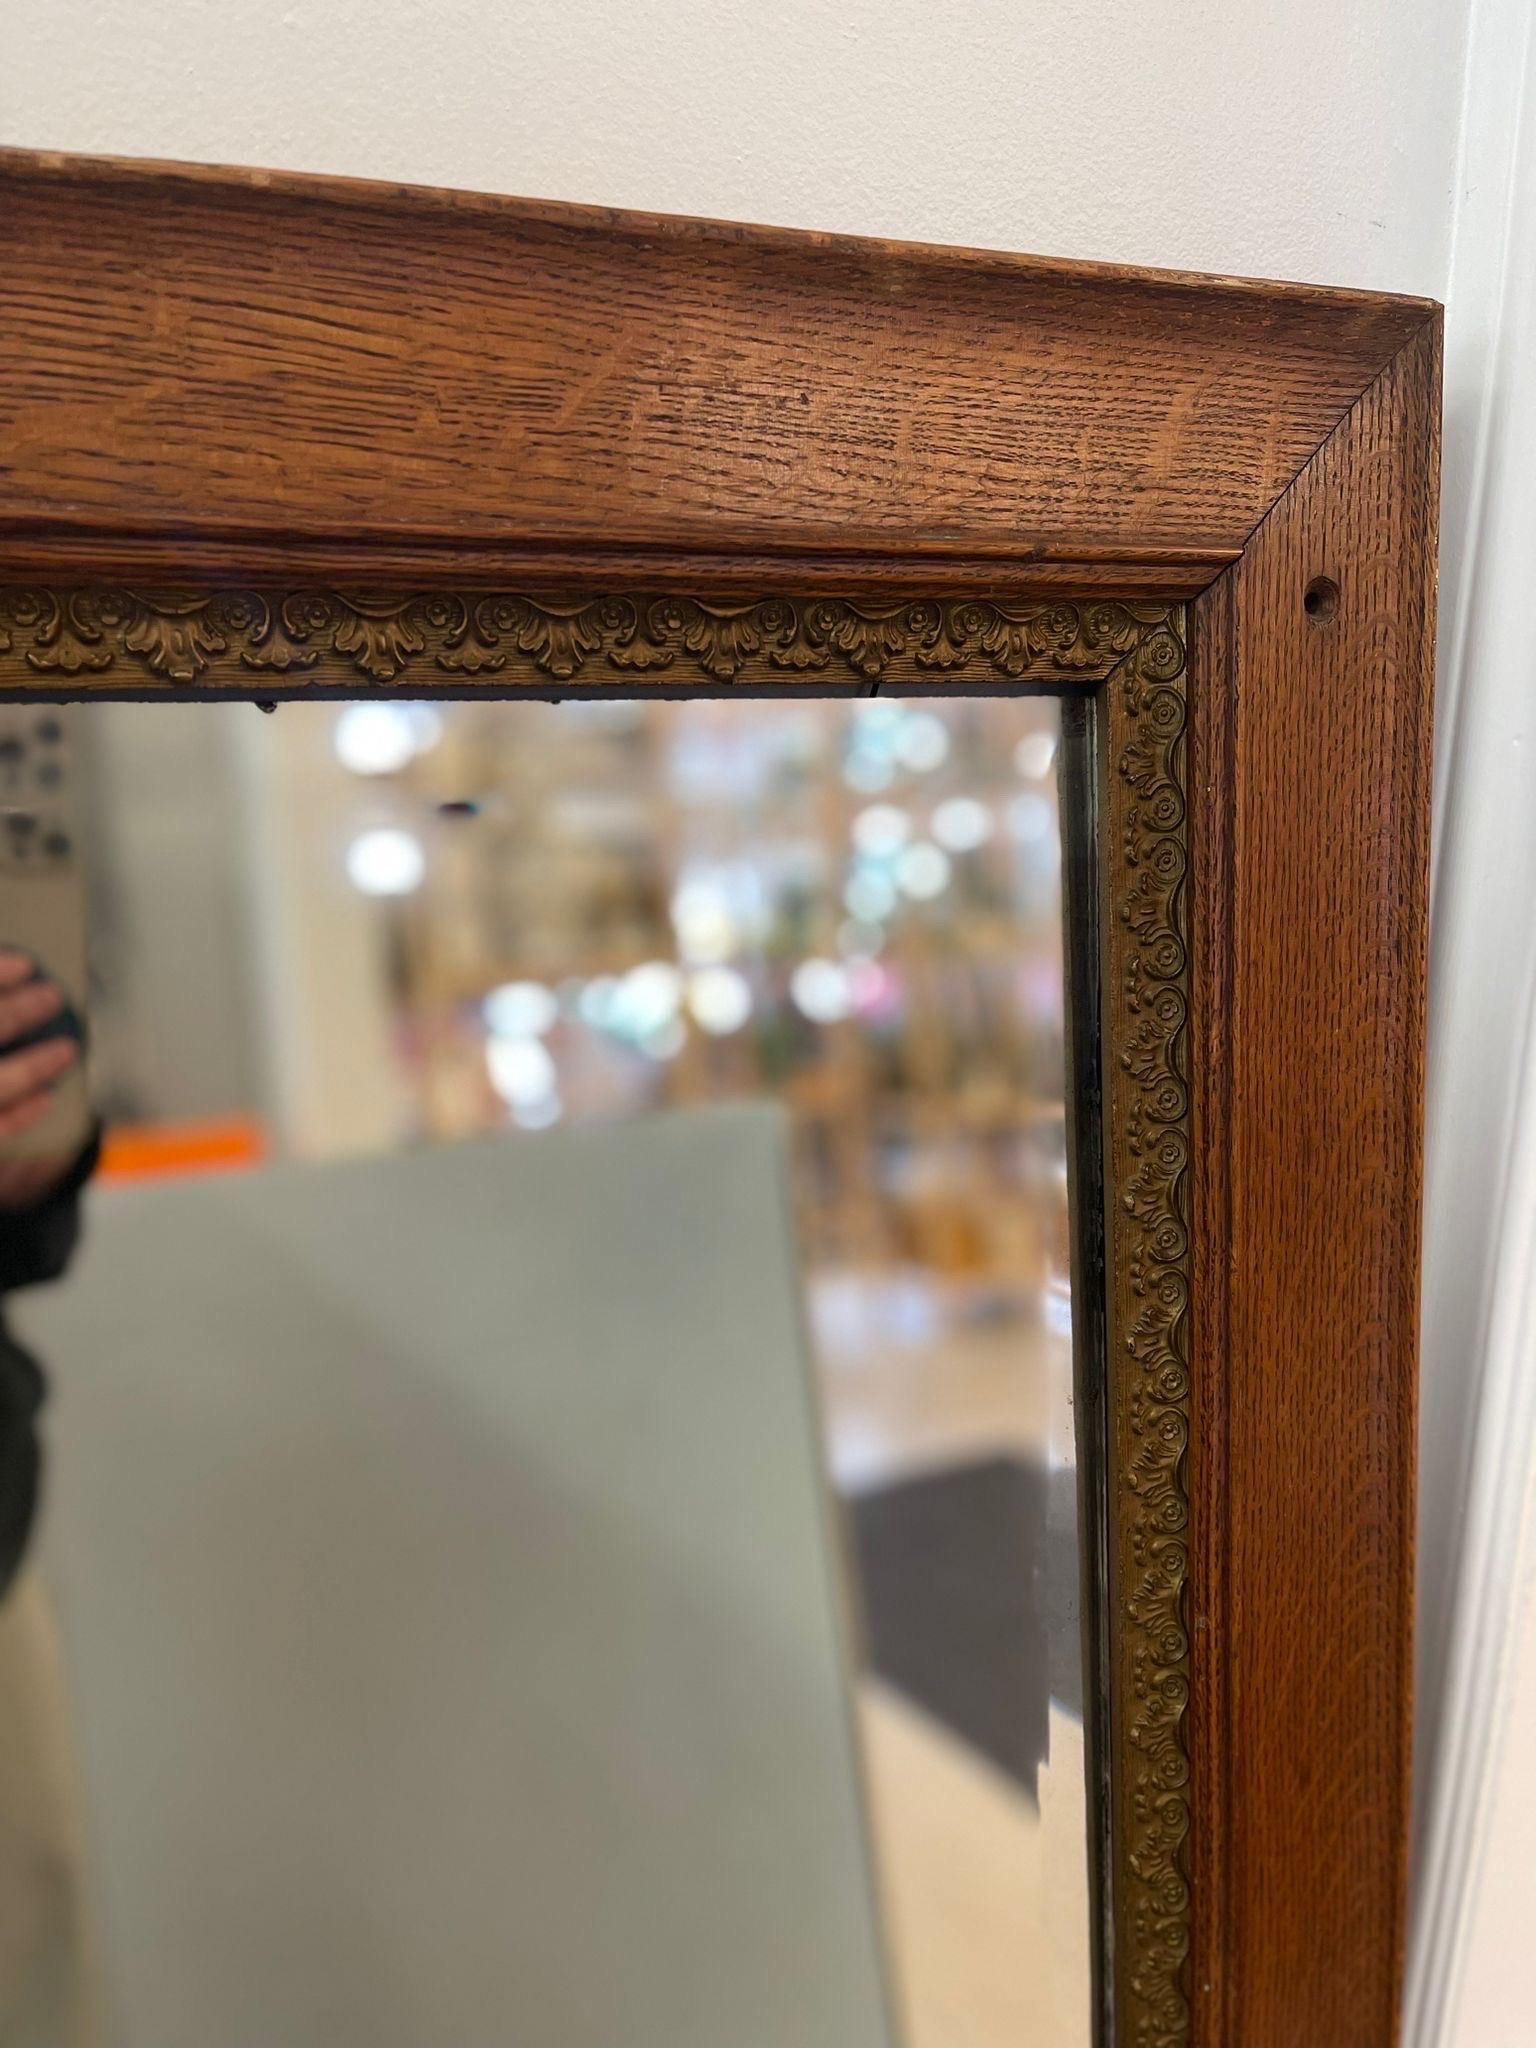 Late 20th Century Antique Style Wall Mirror With Ornate Golden Toned Banding Around the Frame. For Sale